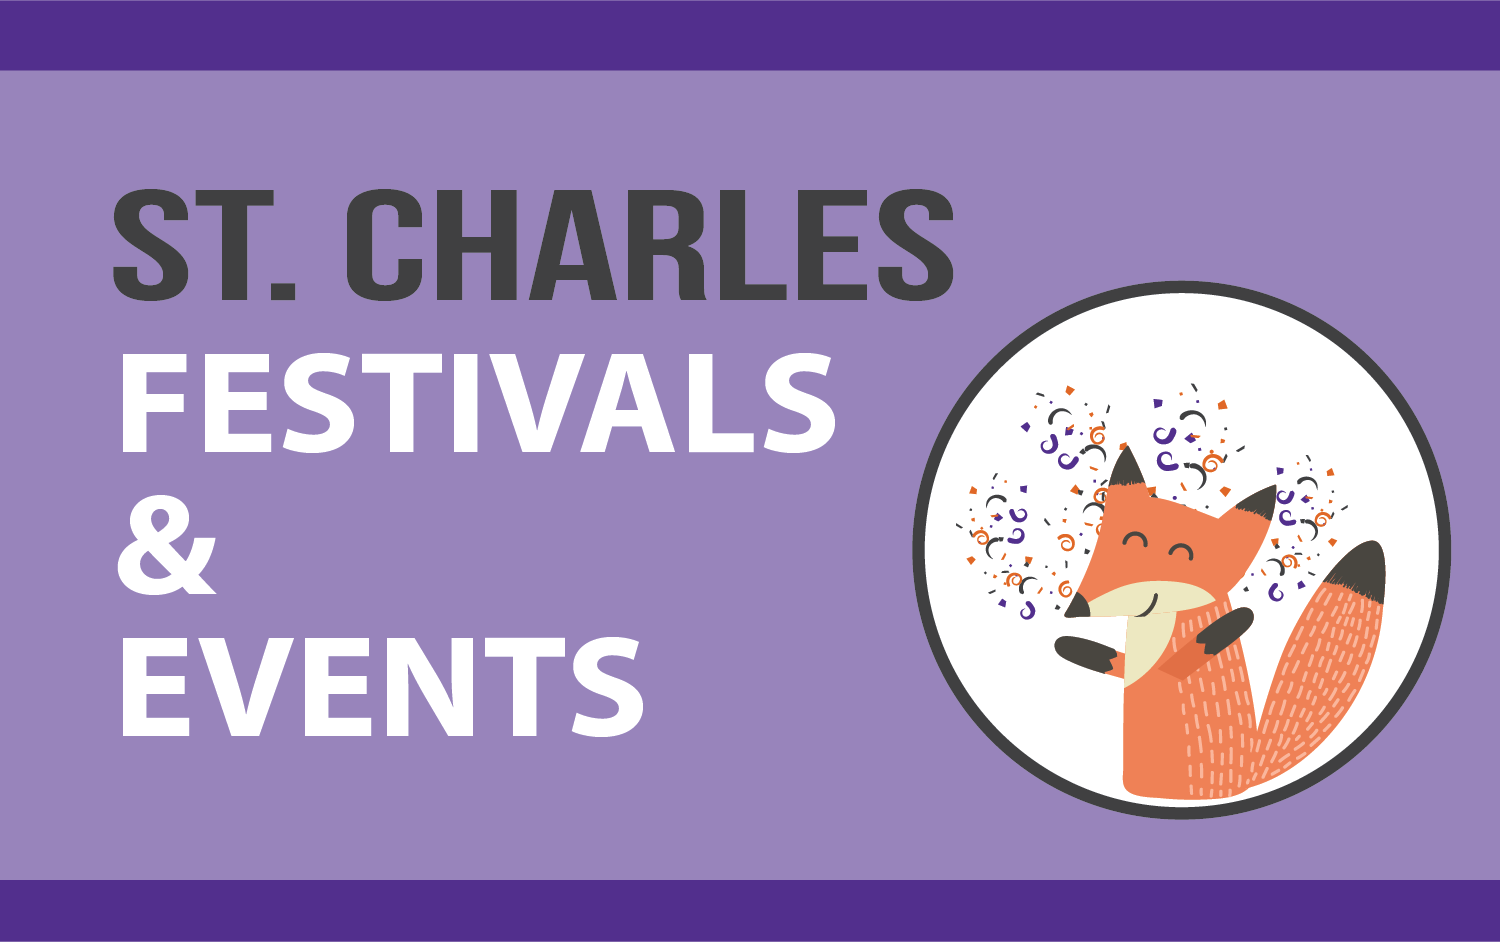 Festivals & Events in St. Charles News City of St Charles, IL